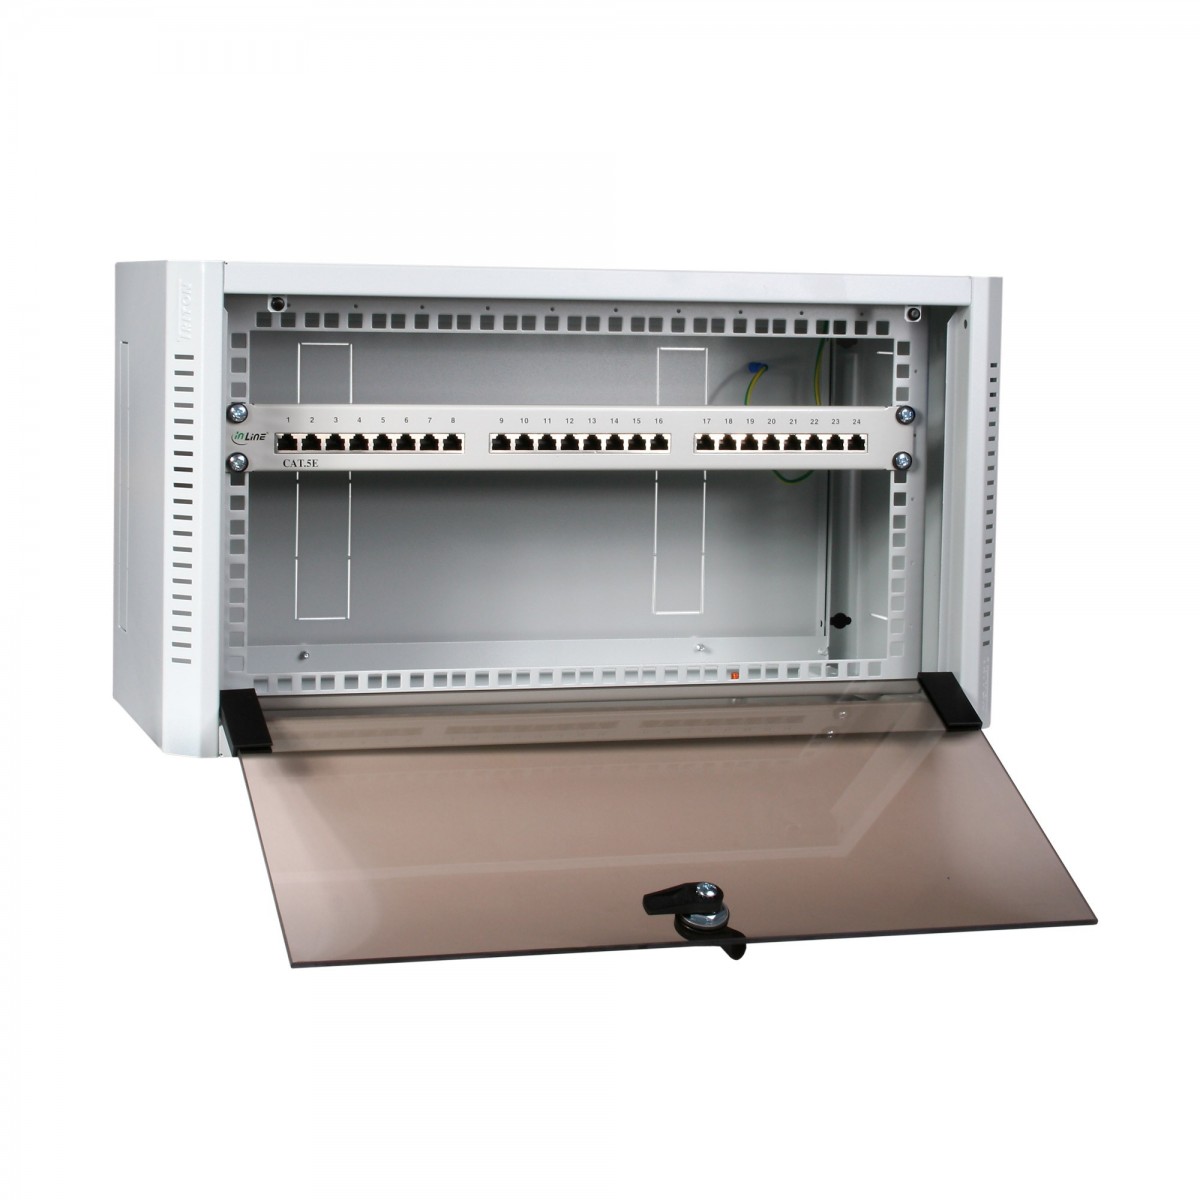 TRITON RKA-10-AS5-CAX-X1 - Wall mounted rack - 20 kg - 14.7 kg - Stainless steel